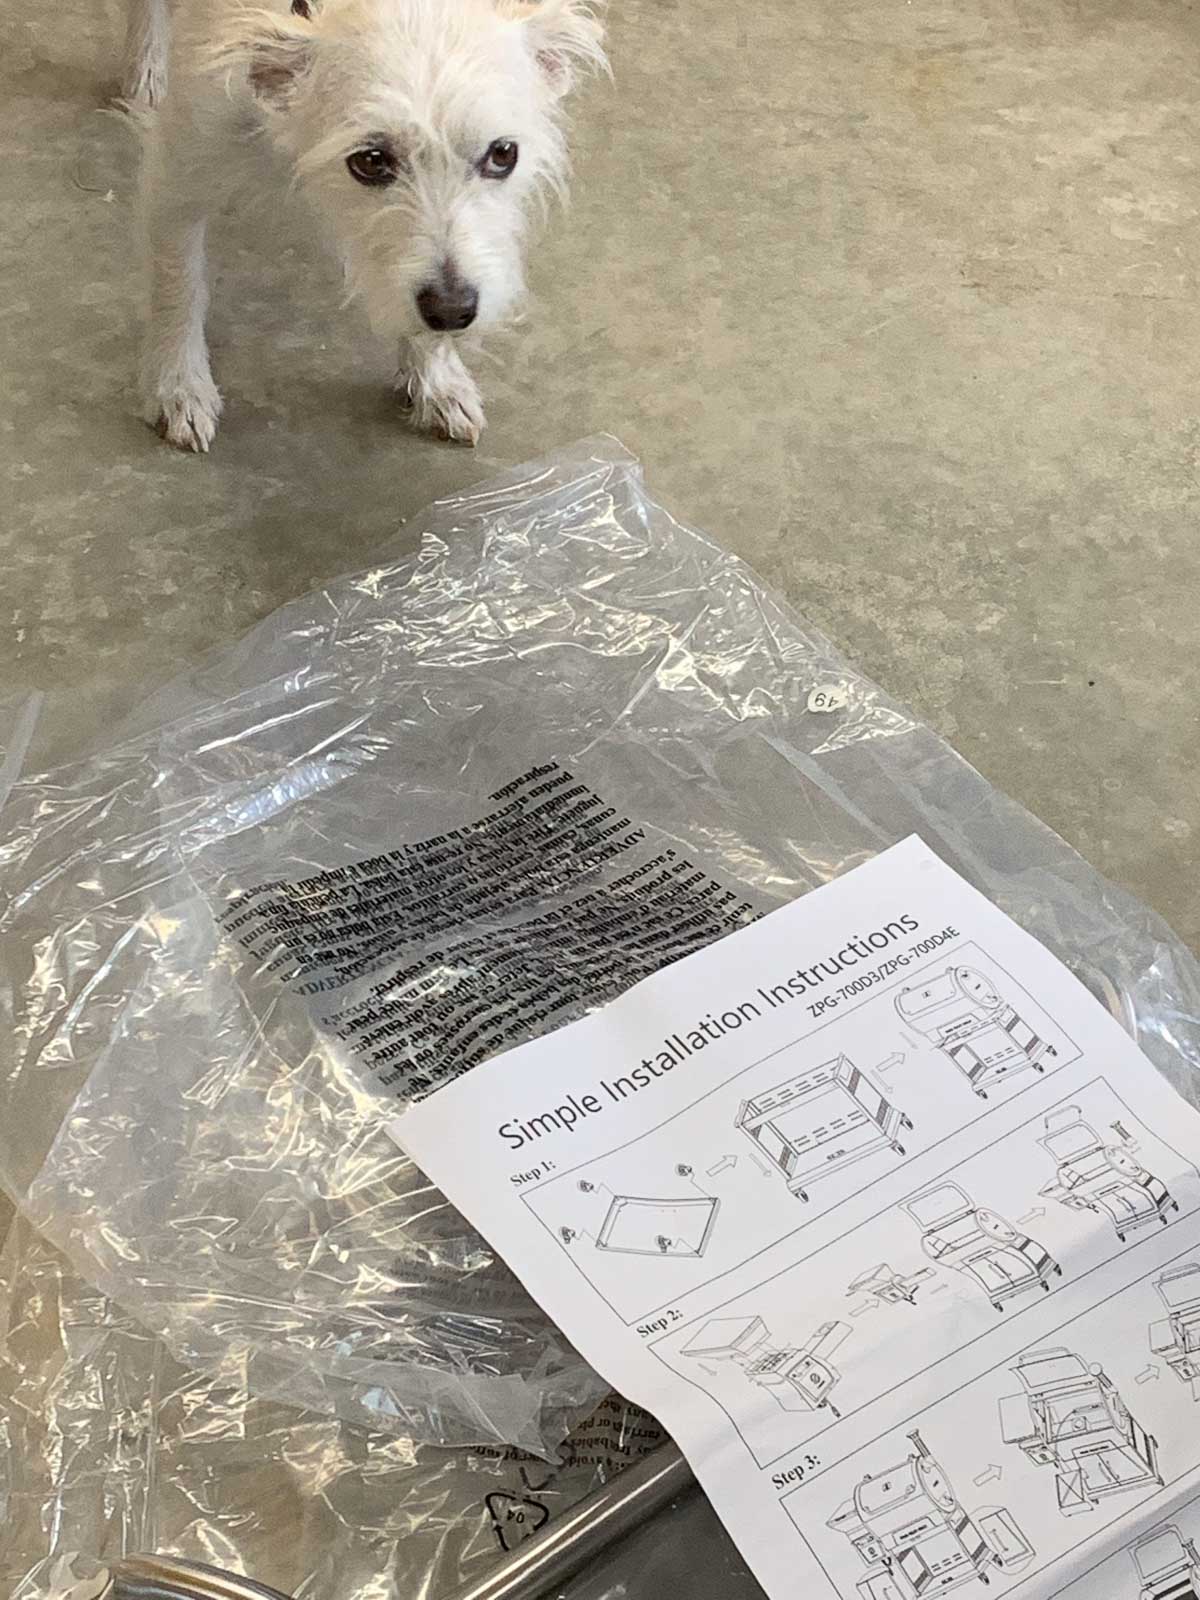 a white terrier looking at an instructions manual